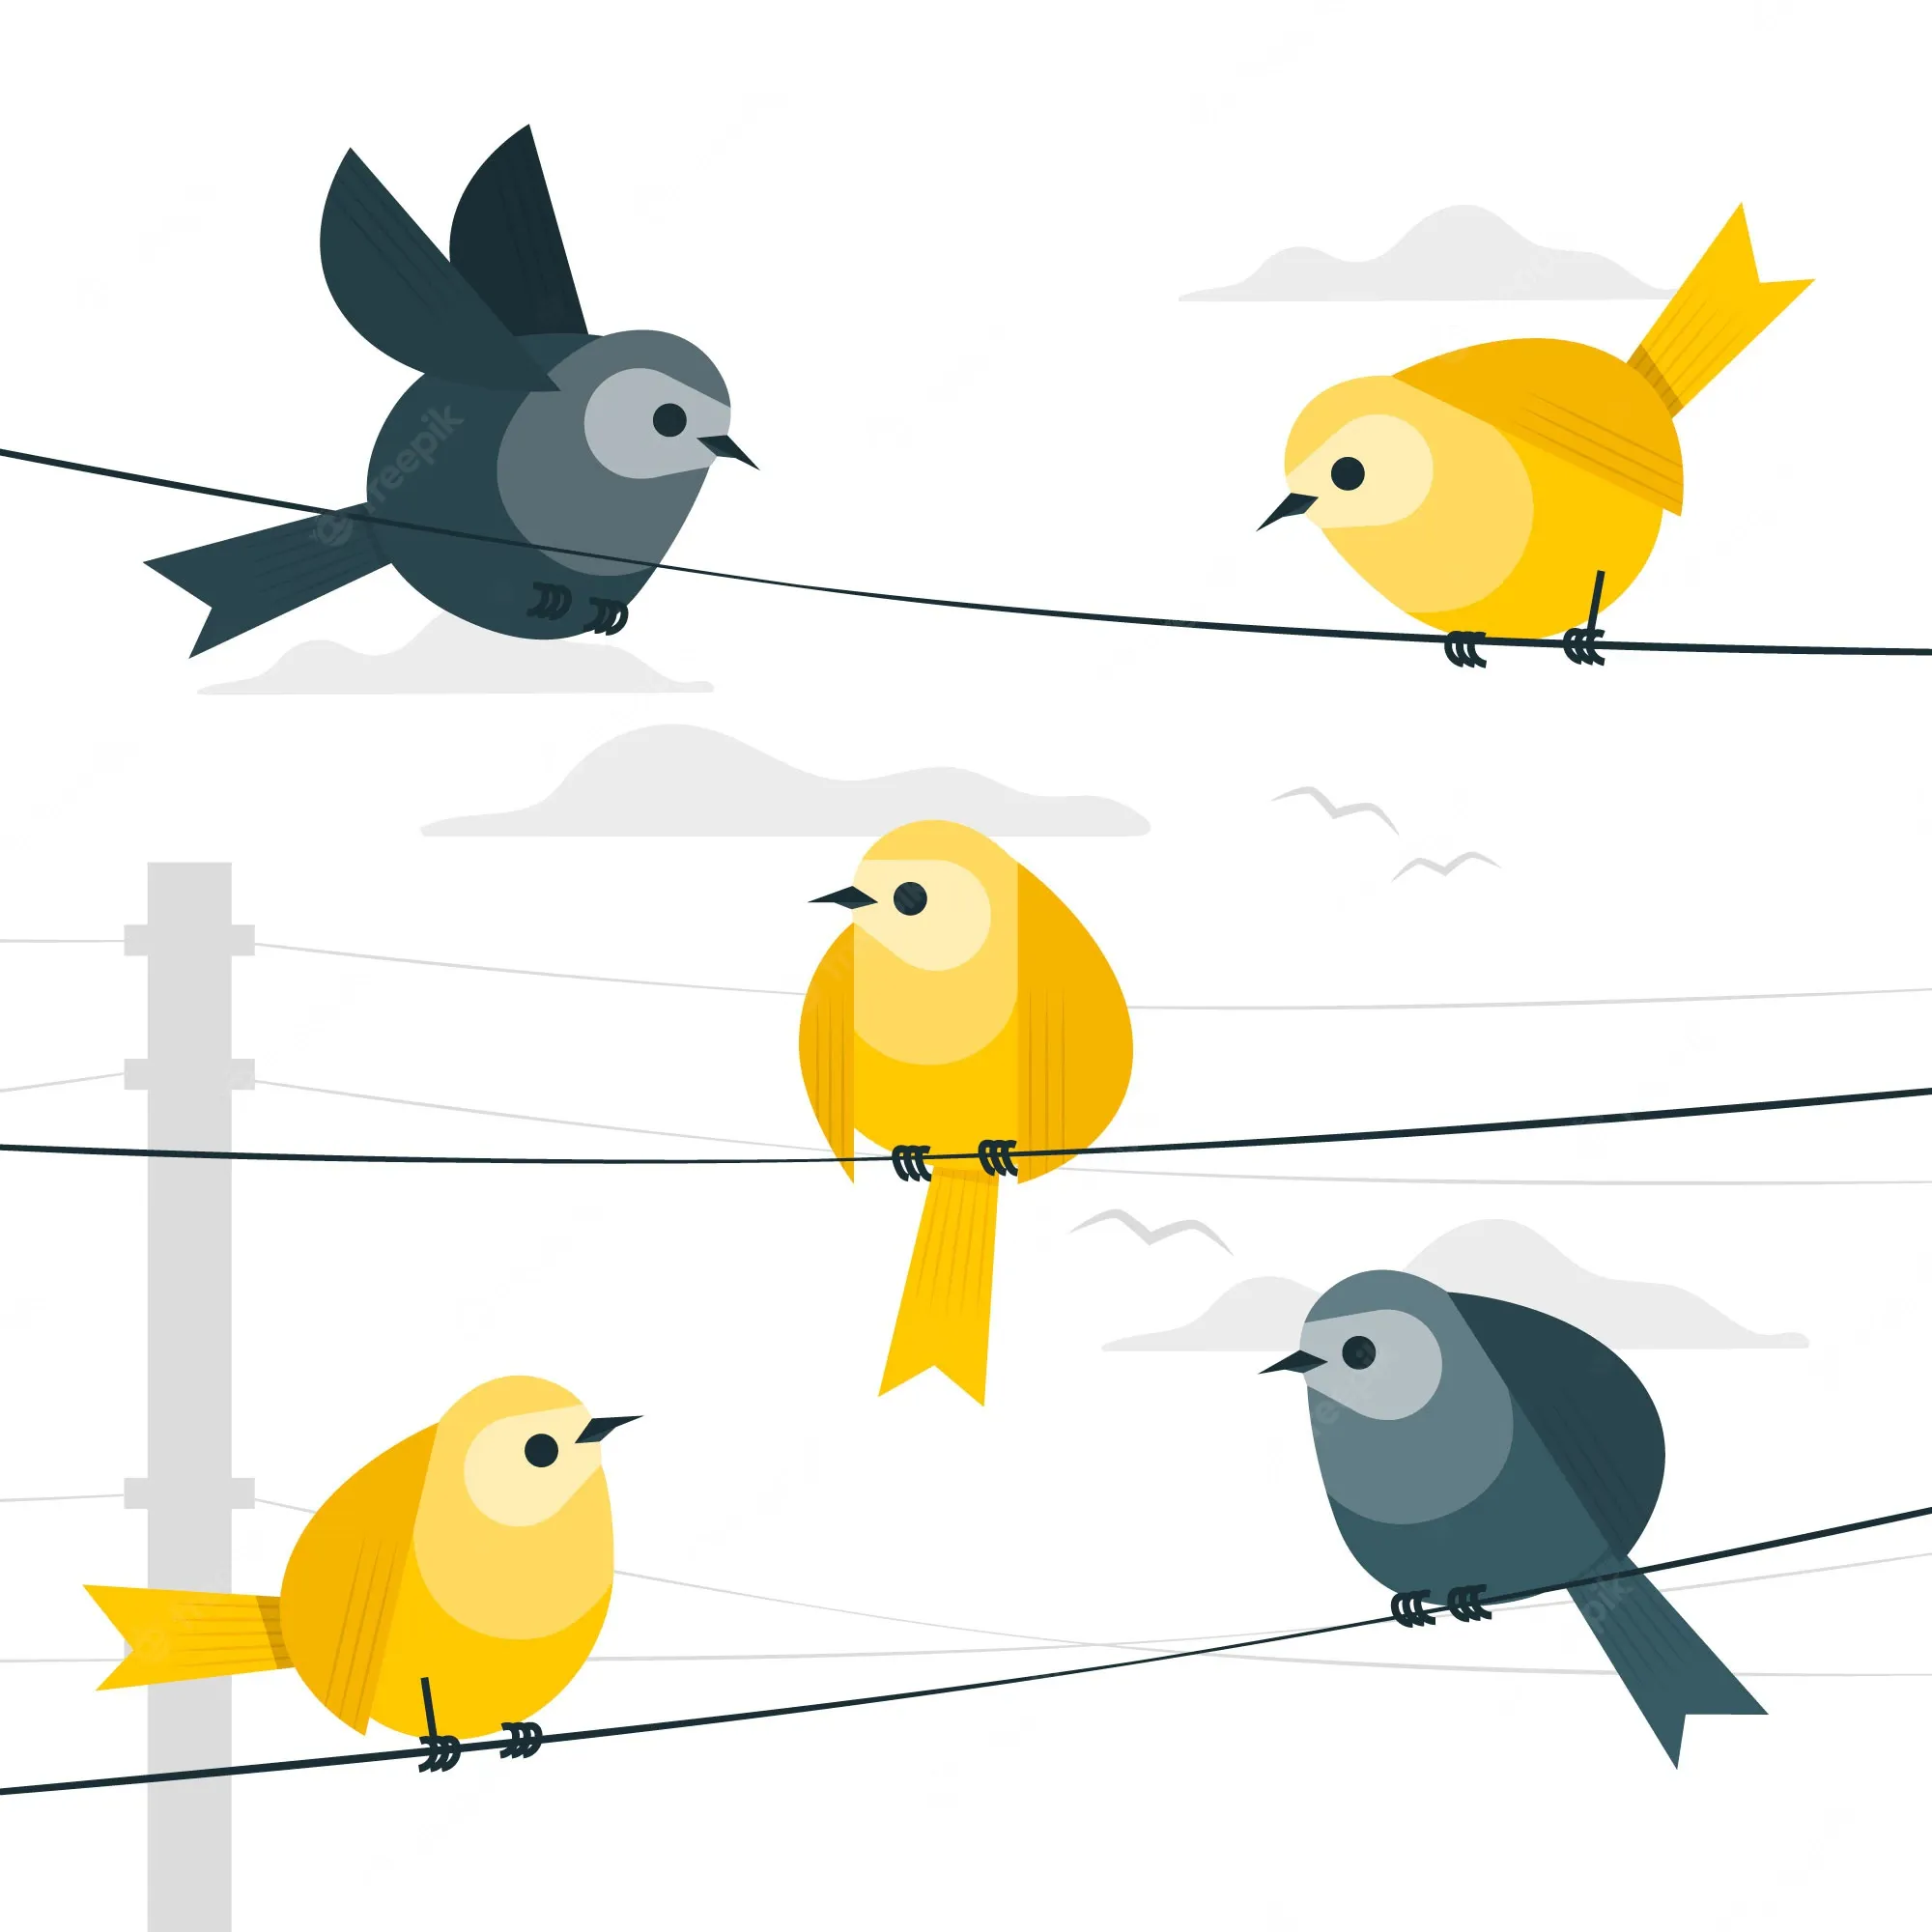 Why birds sitting on electric wires don't get electrocuted shocked